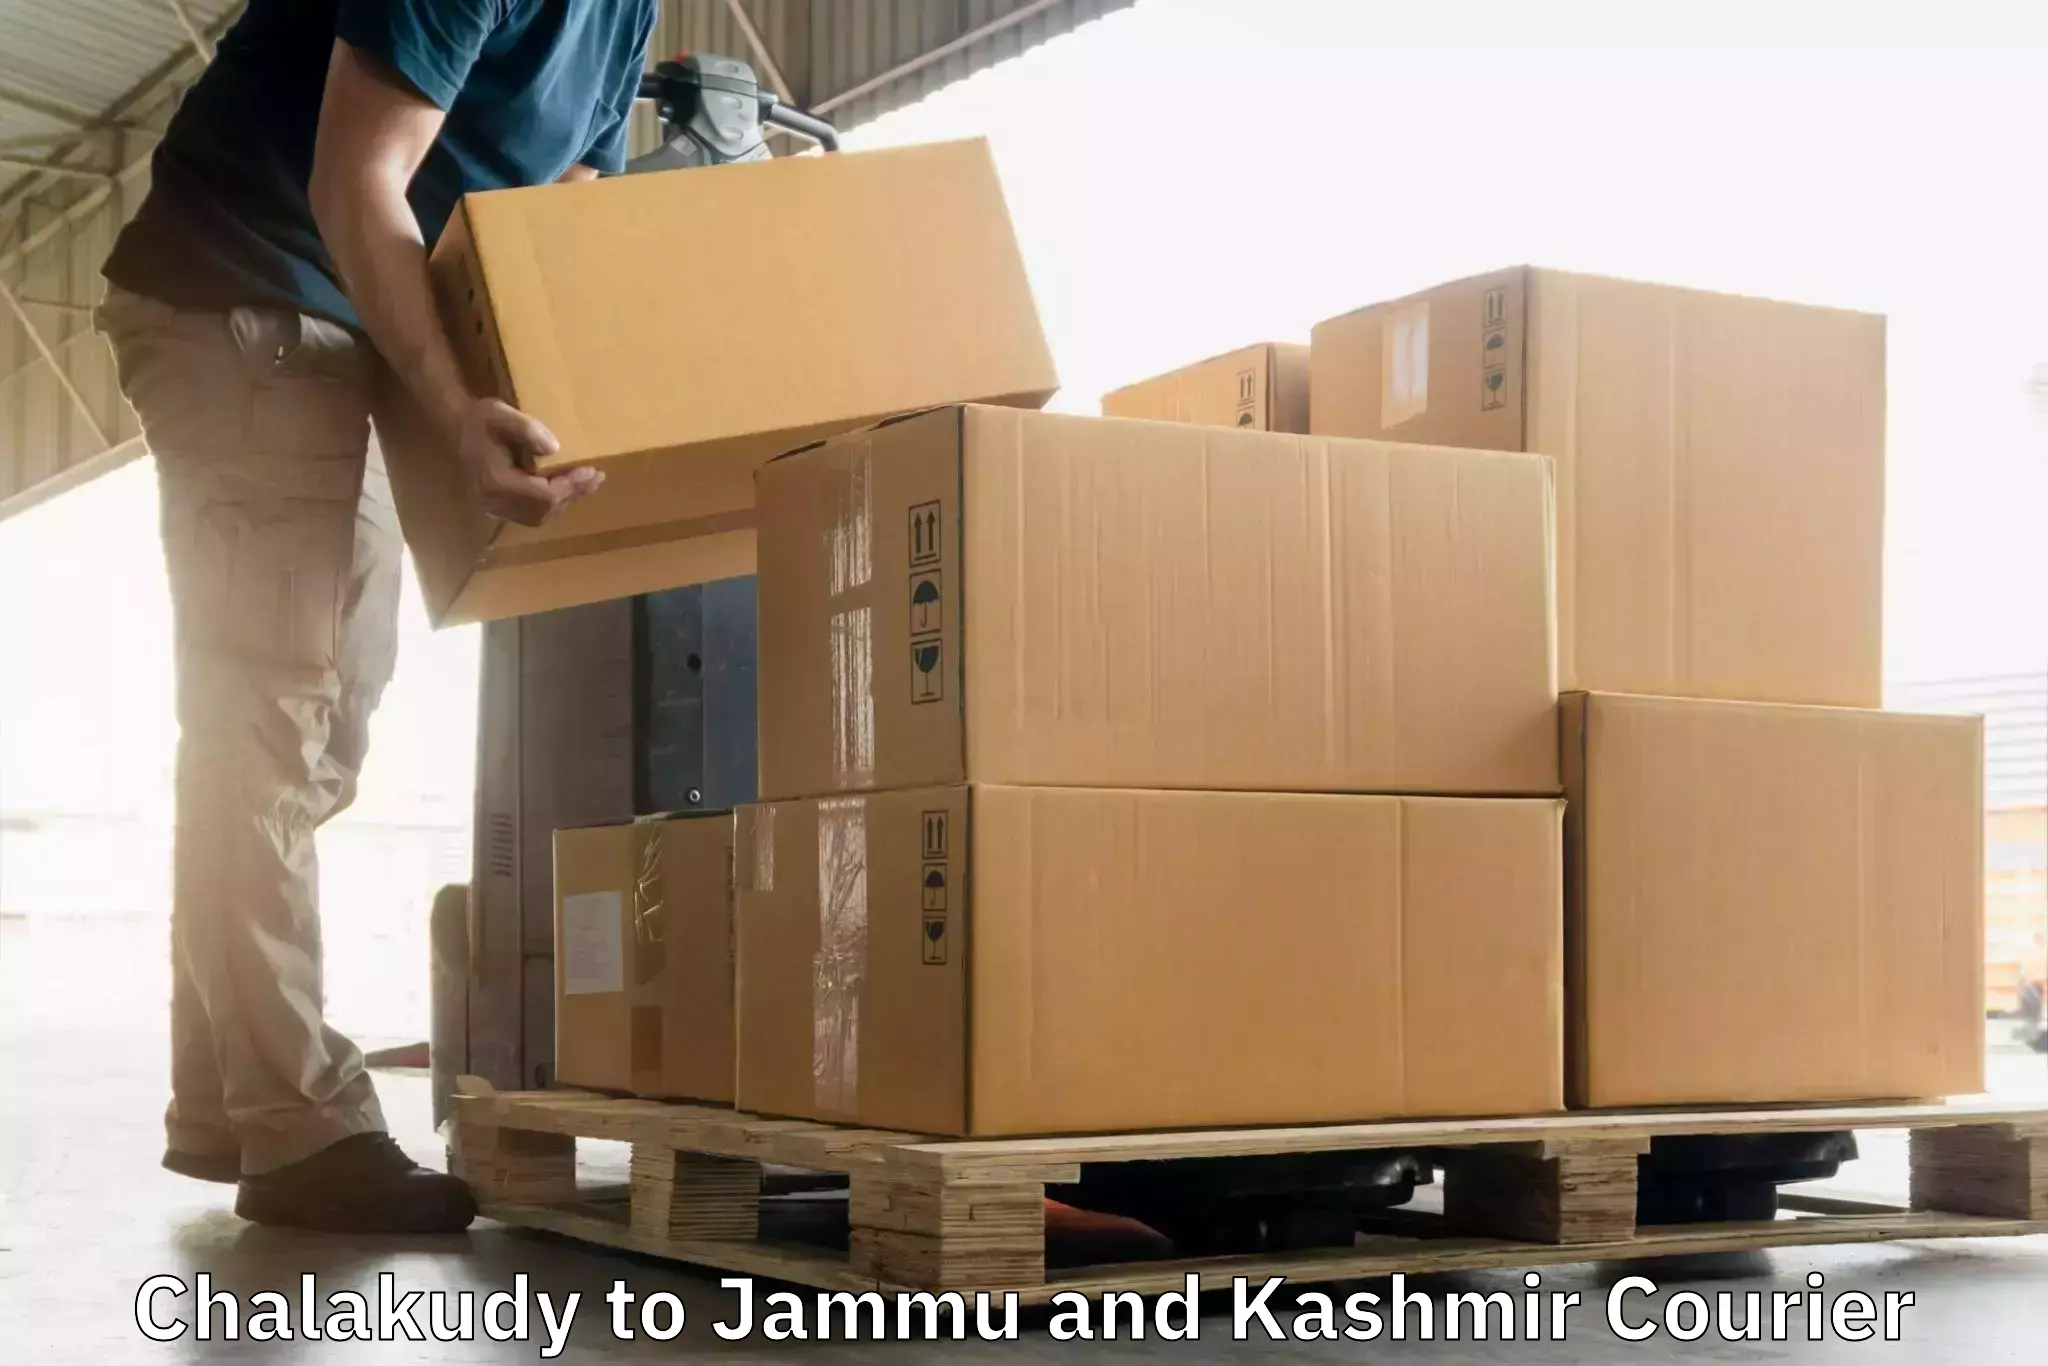 Express package handling Chalakudy to Jammu and Kashmir